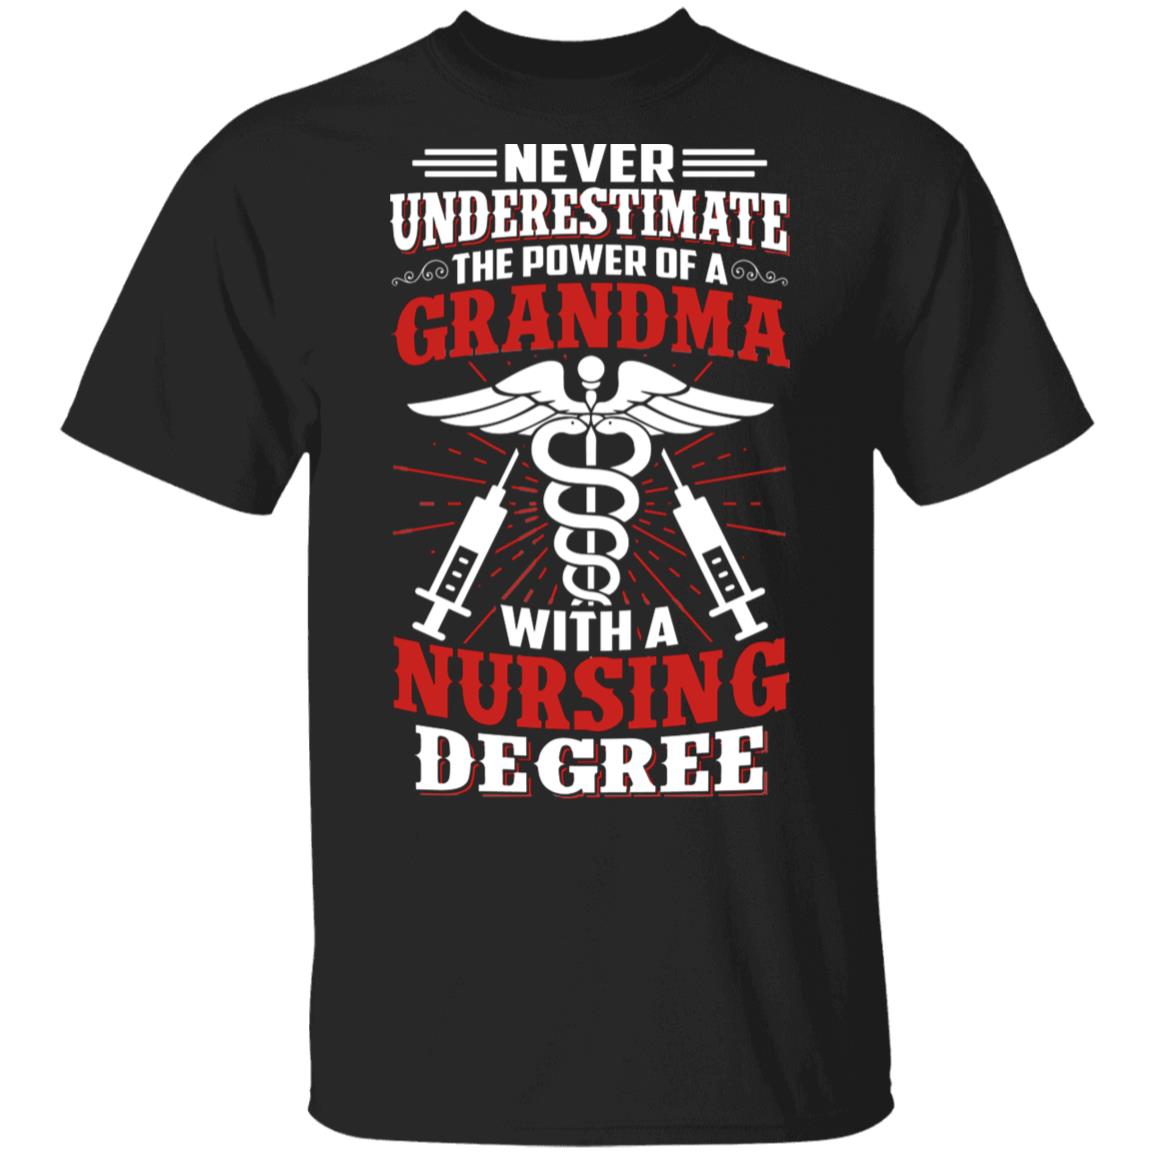 Never Underestimate The Power of A Grandma With A Nursing Degree Shirt